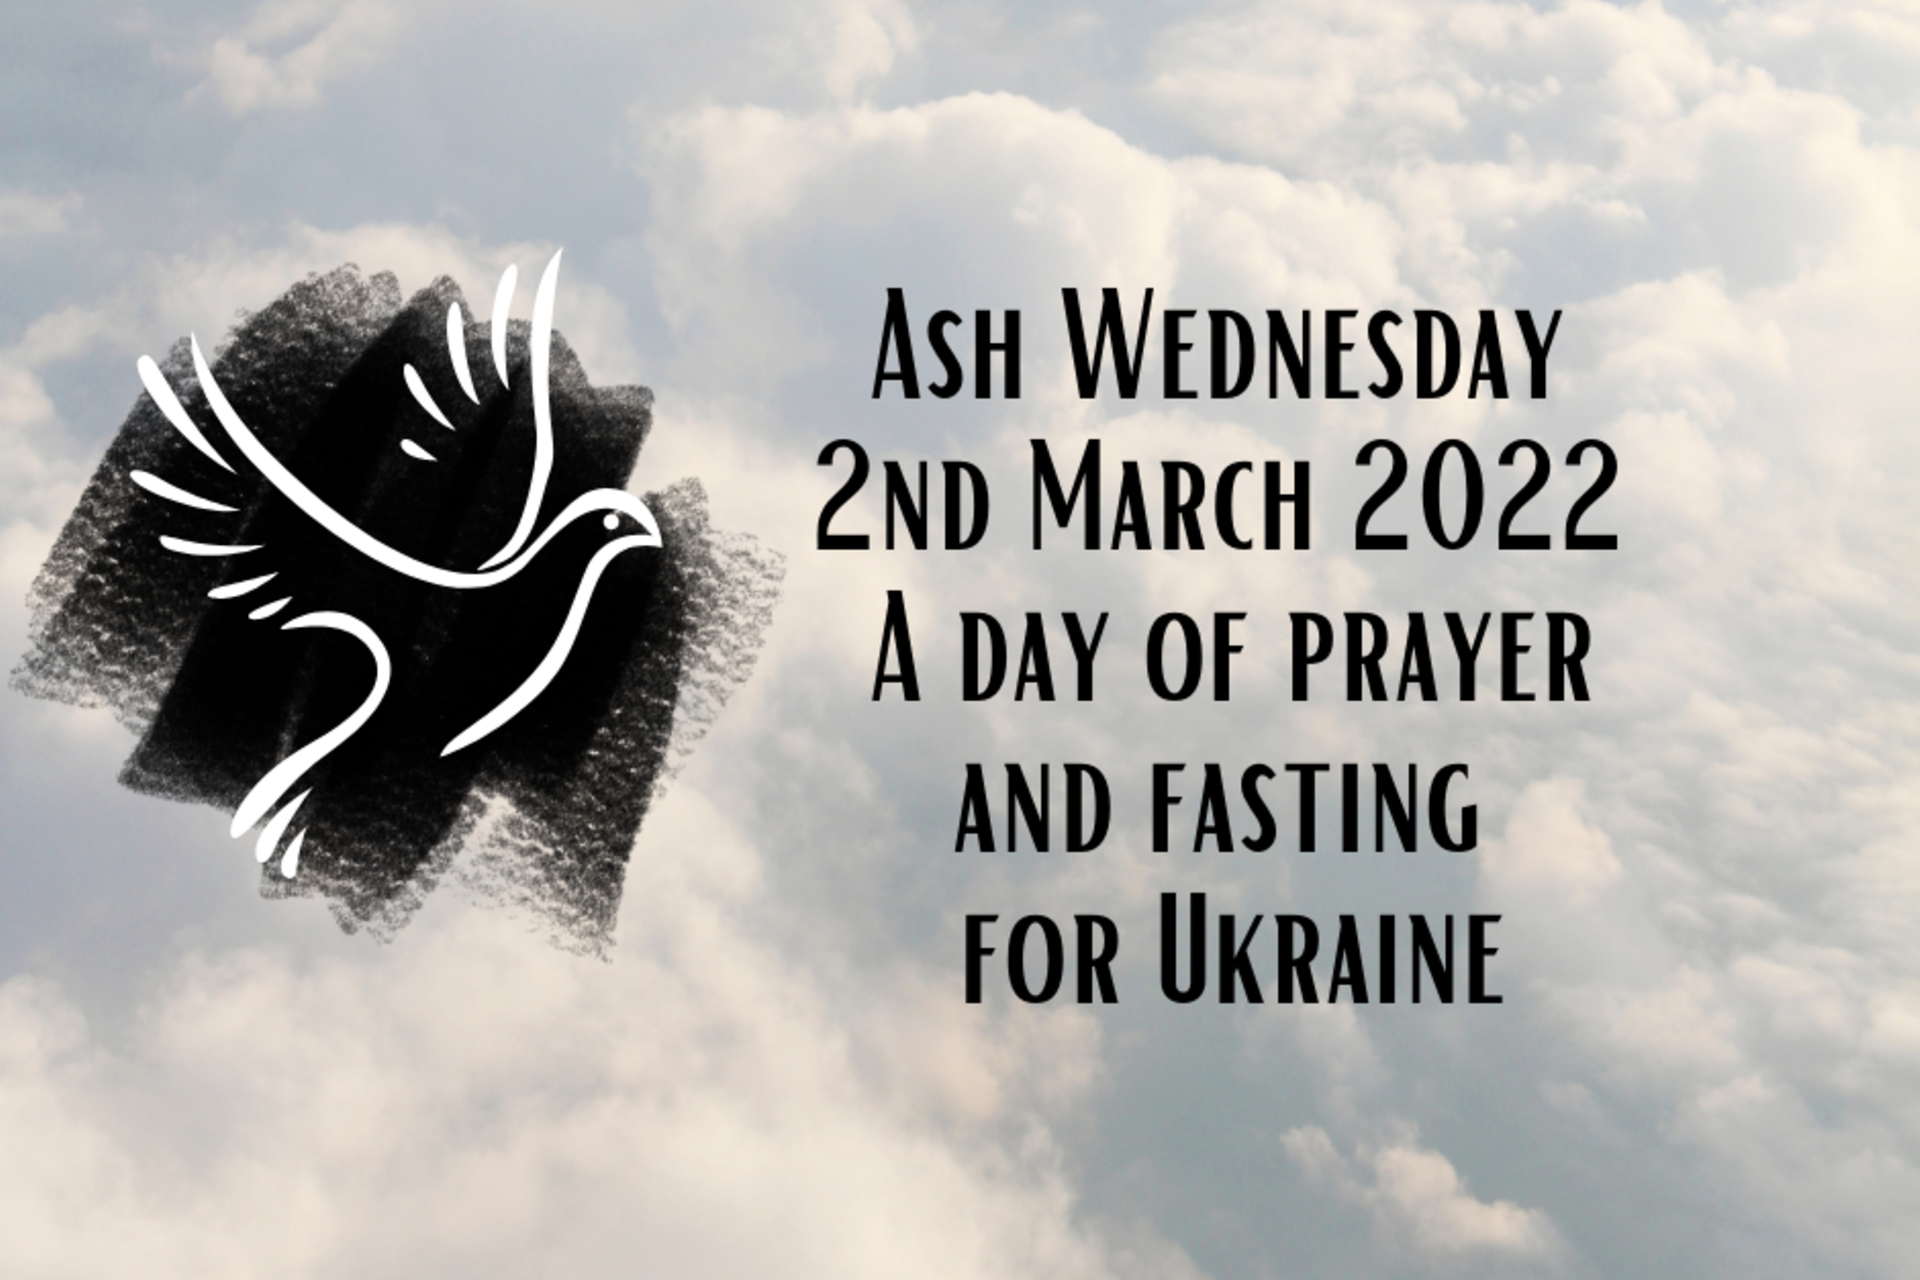 Pope Francis announces 2 March (Ash Wednesday) as a day of prayer and fasting for Ukraine